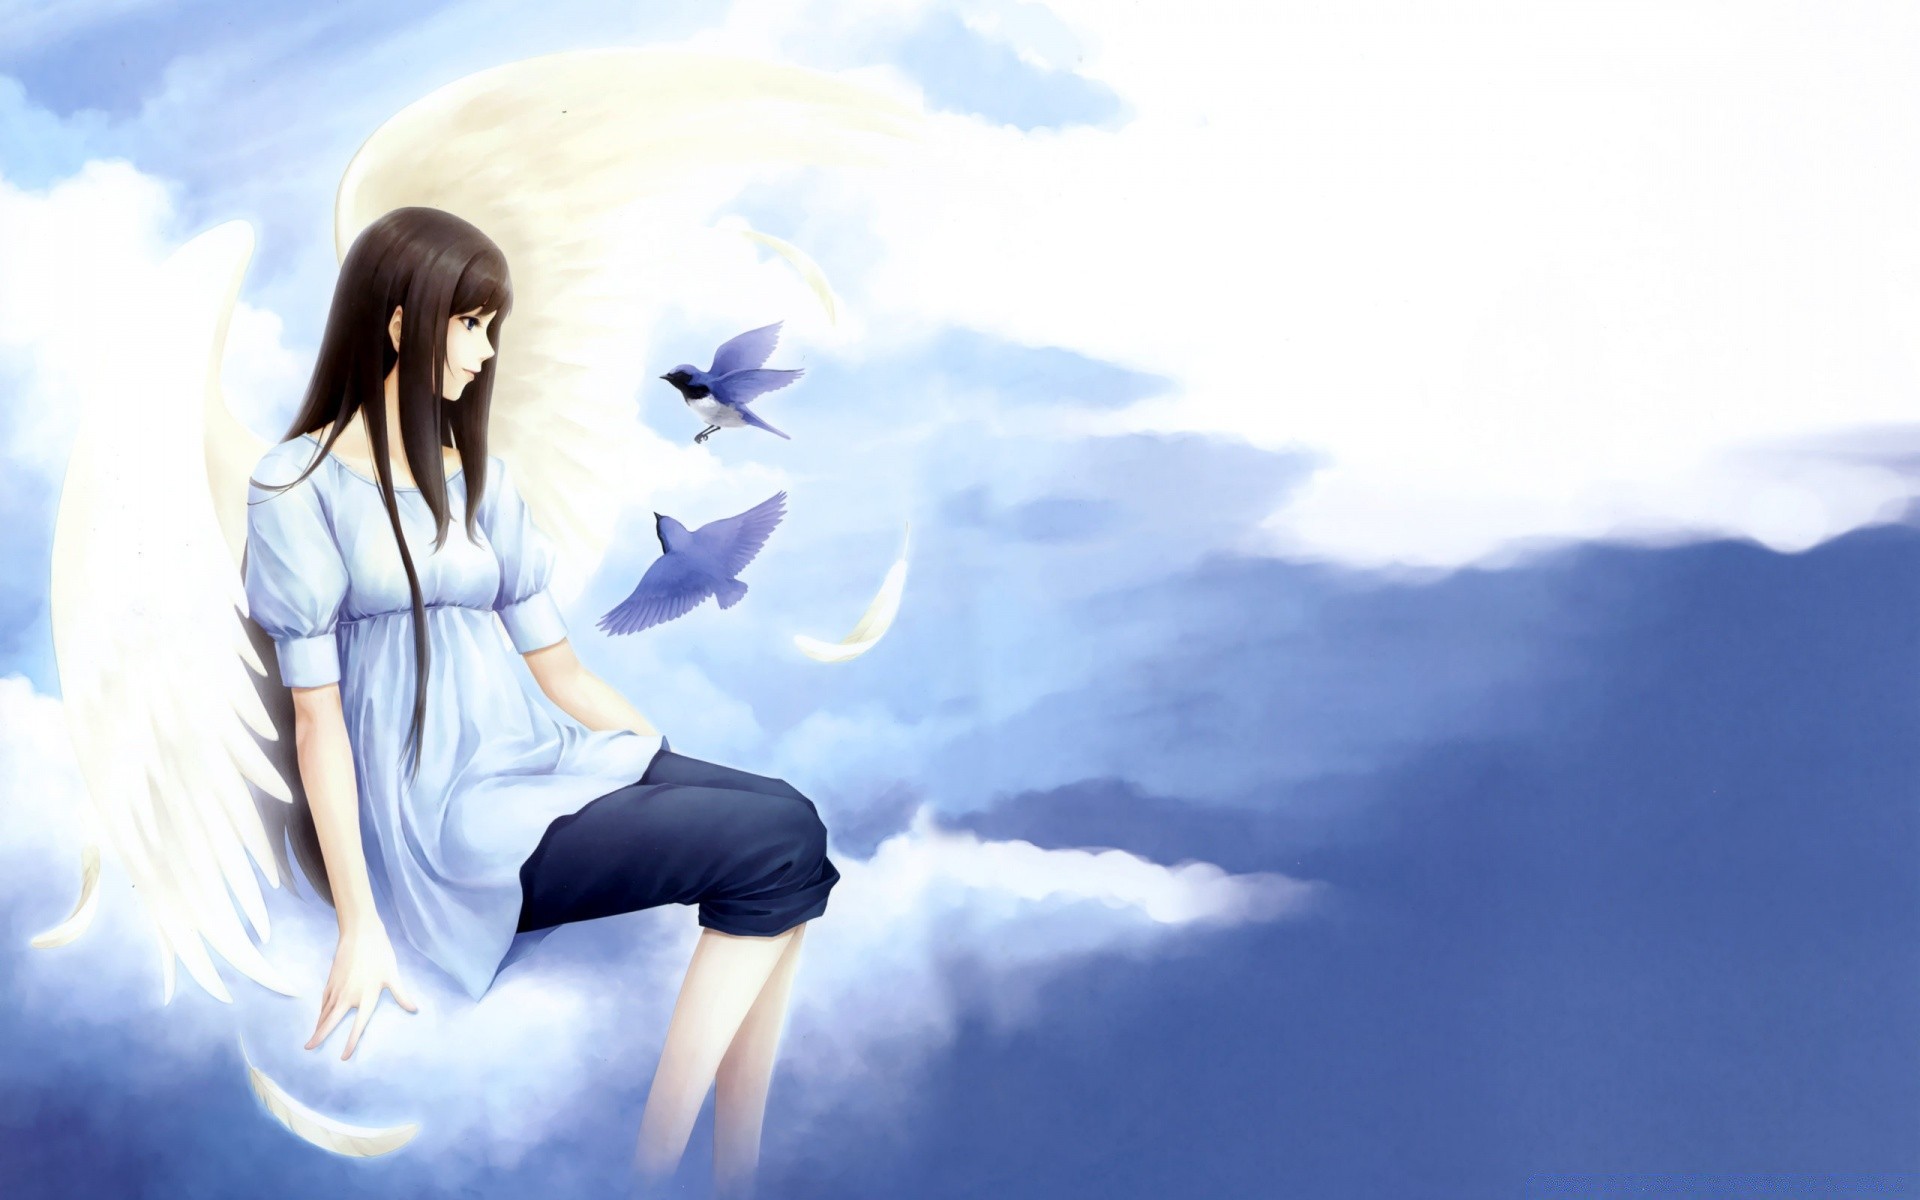 anime sky outdoors one adult woman girl portrait daylight freedom